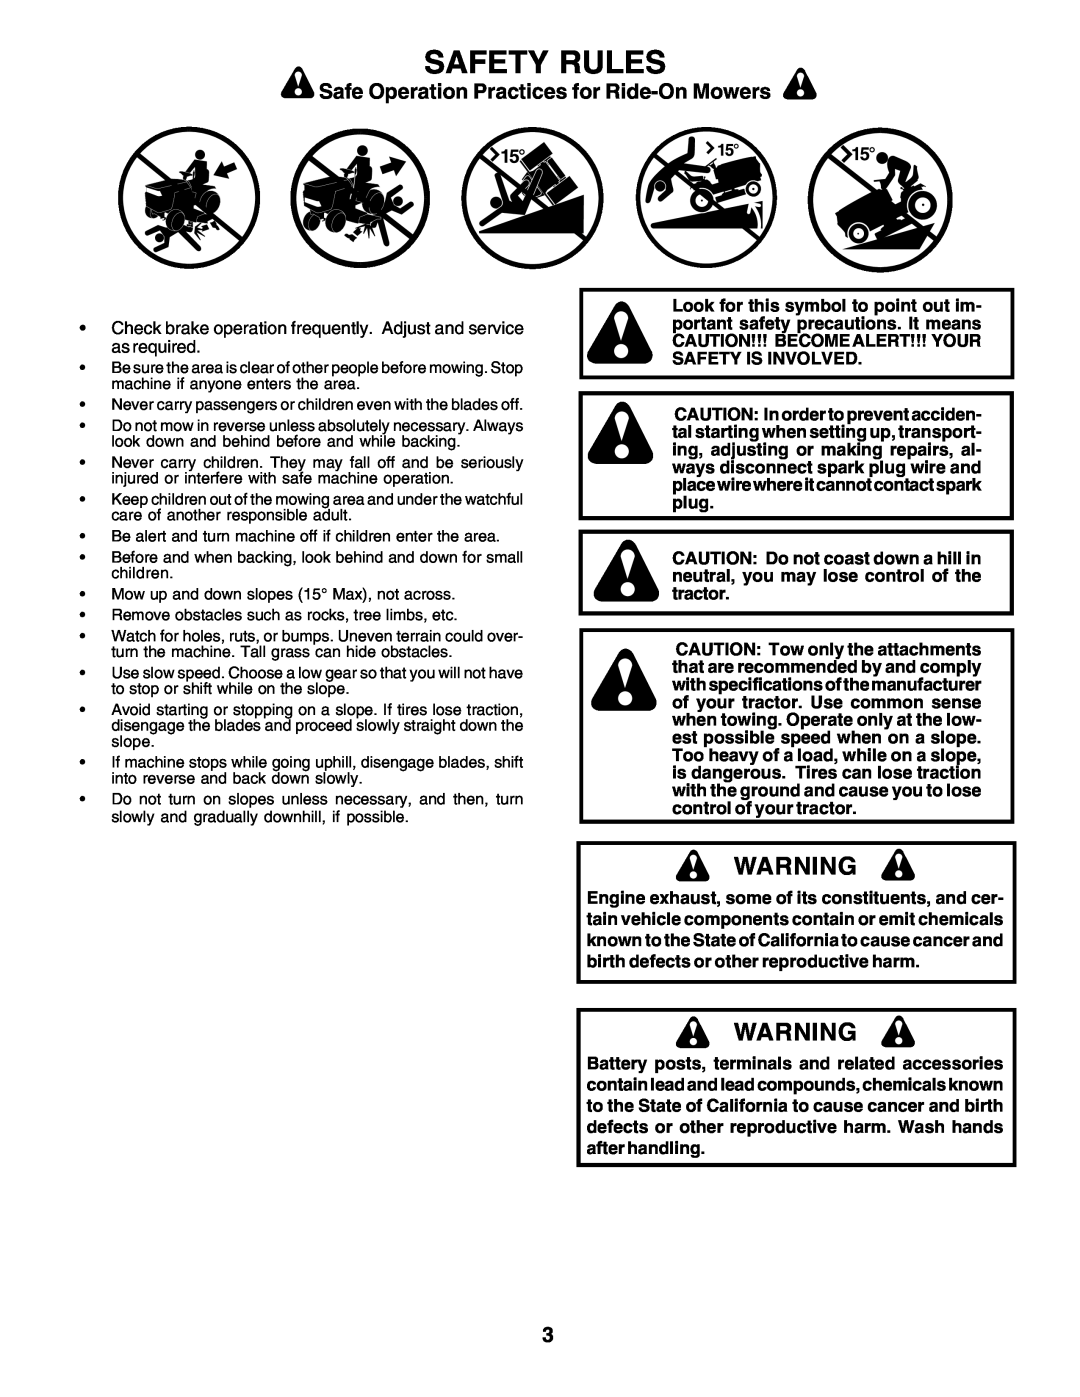 Poulan 177271 owner manual Safety Rules, Safe Operation Practices for Ride-On Mowers 